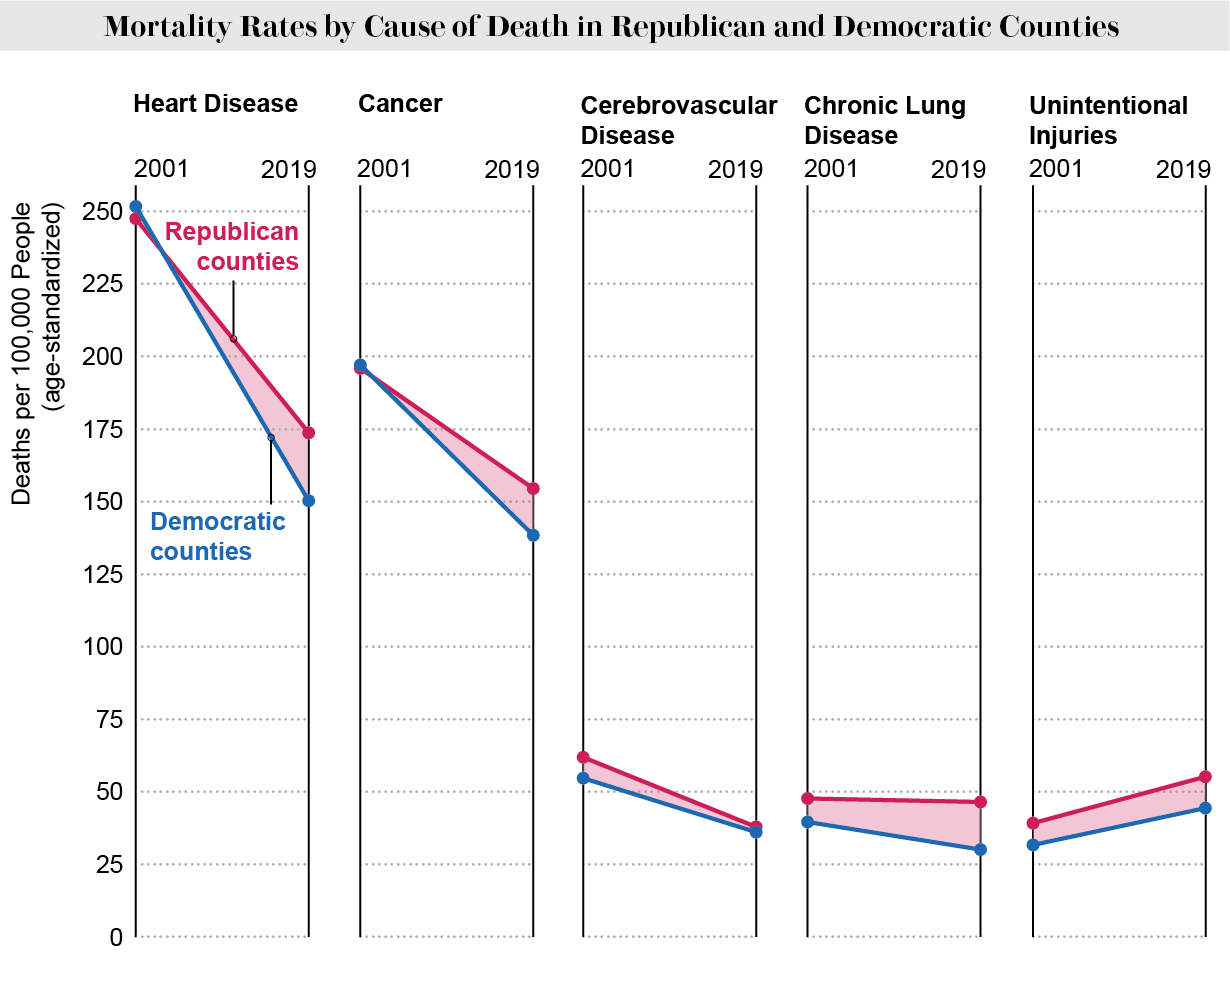 Line chart shows death rates by cause of death in U.S. Republican and Democratic counties in 2001 and 2019.